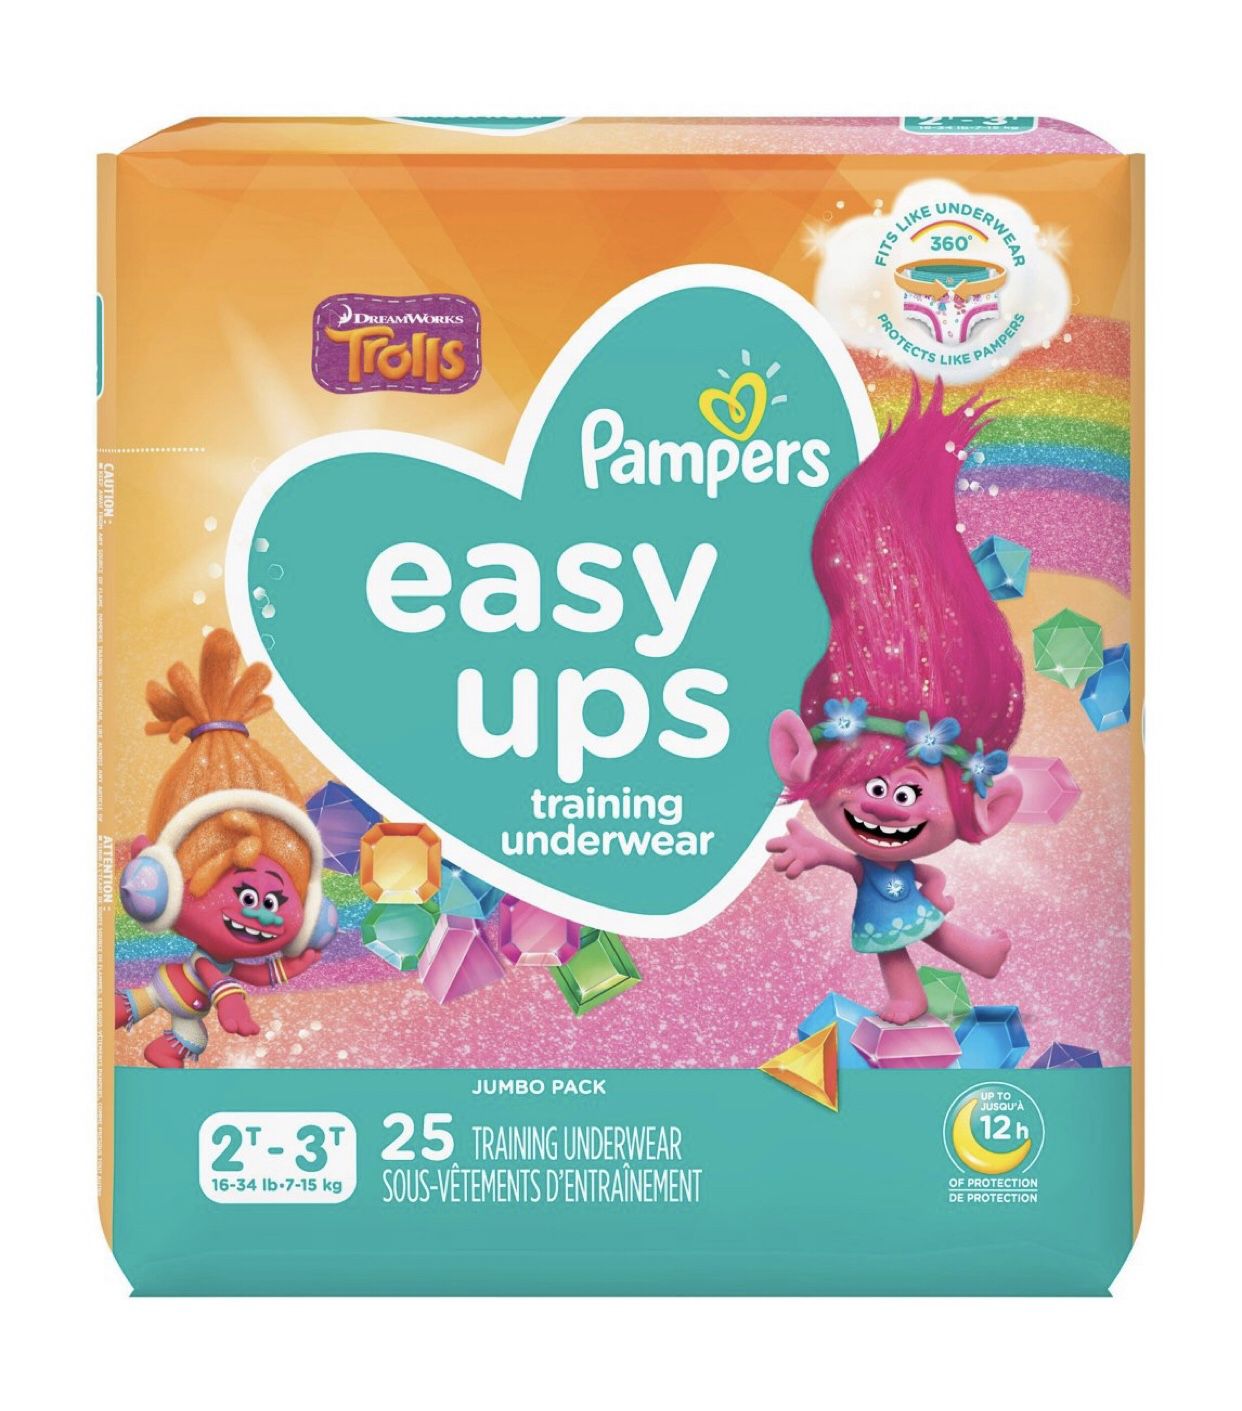 Pampers Easy Up Girl's Trolls Training Underwear Jumbo Pack - Size 2T-3T - 25ct